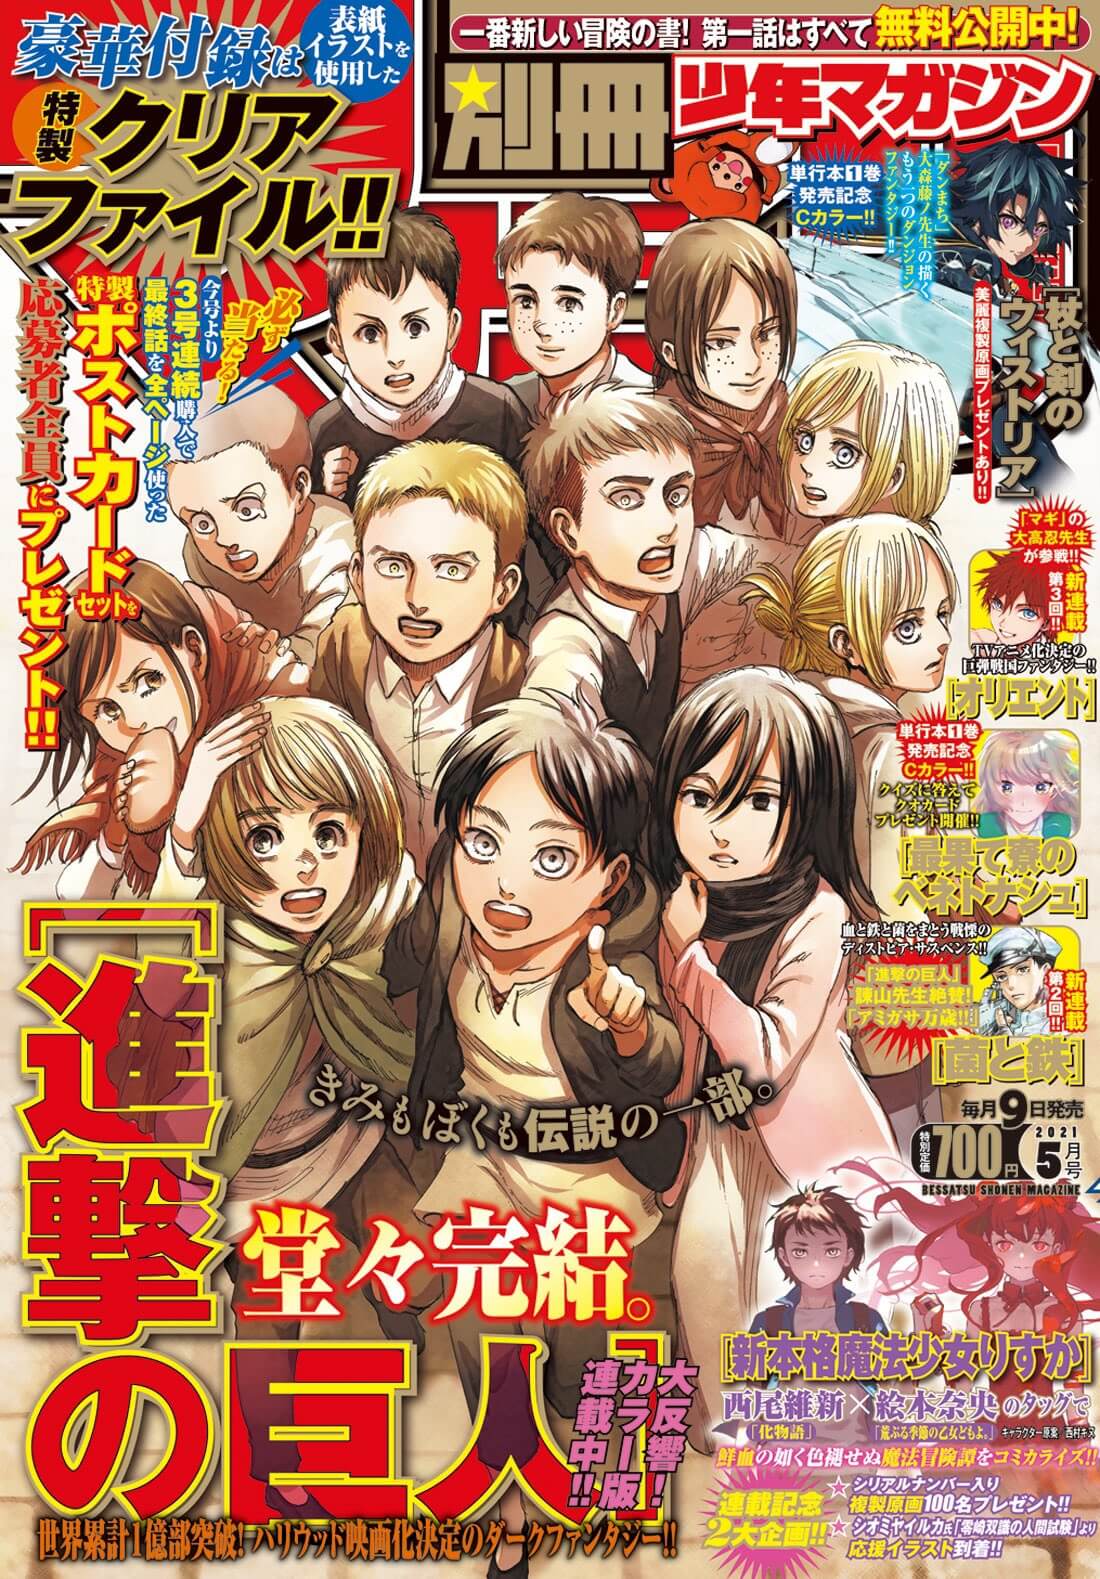 (Updated) Attack On Titan Chapter 139 Raw Scans, Spoilers Release Date